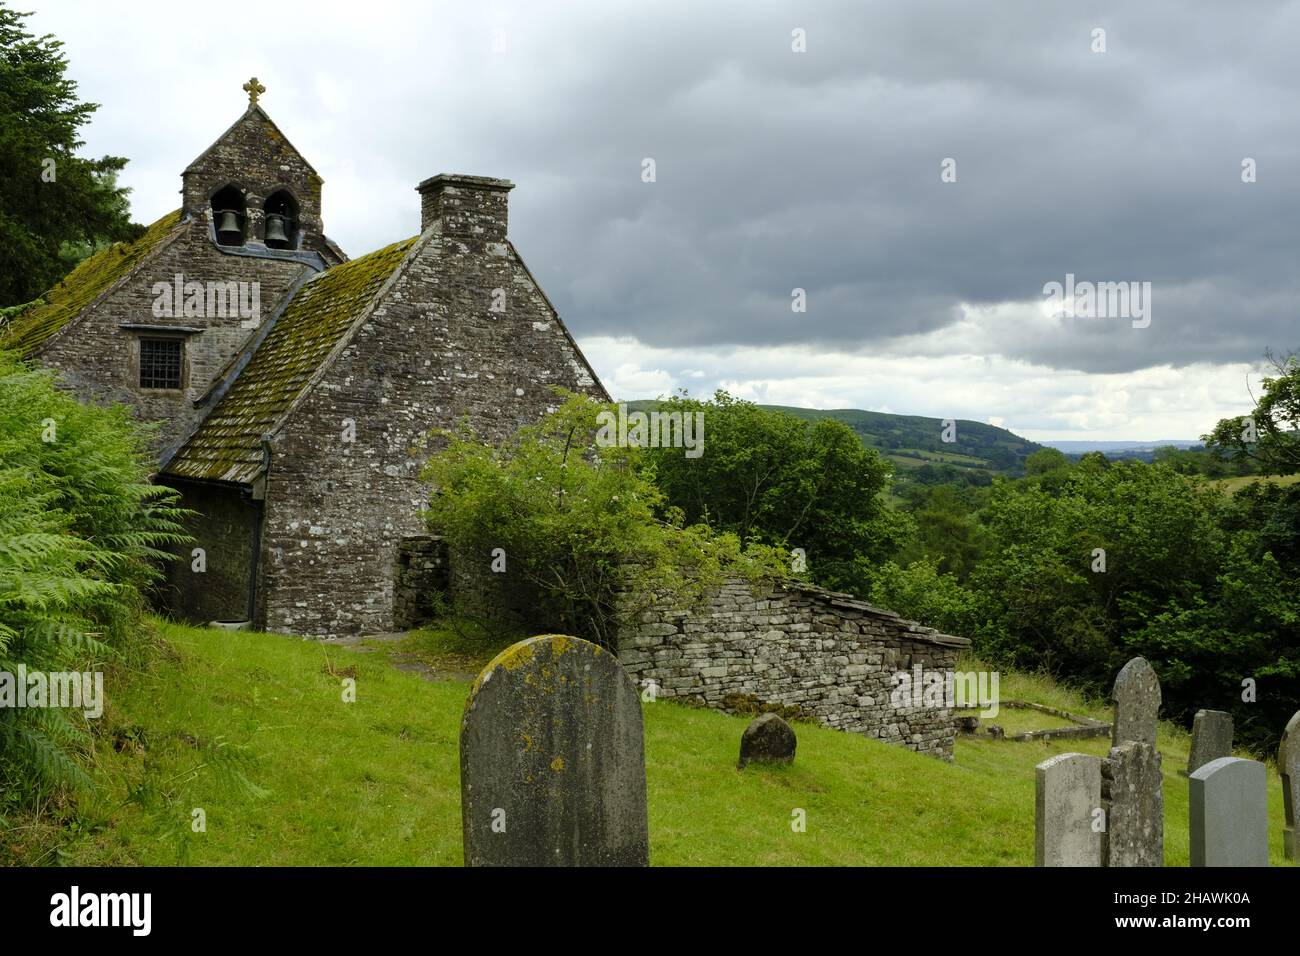 St. Issui's Church and graveyard, Partrishow, Powys, Wales Stock Photo